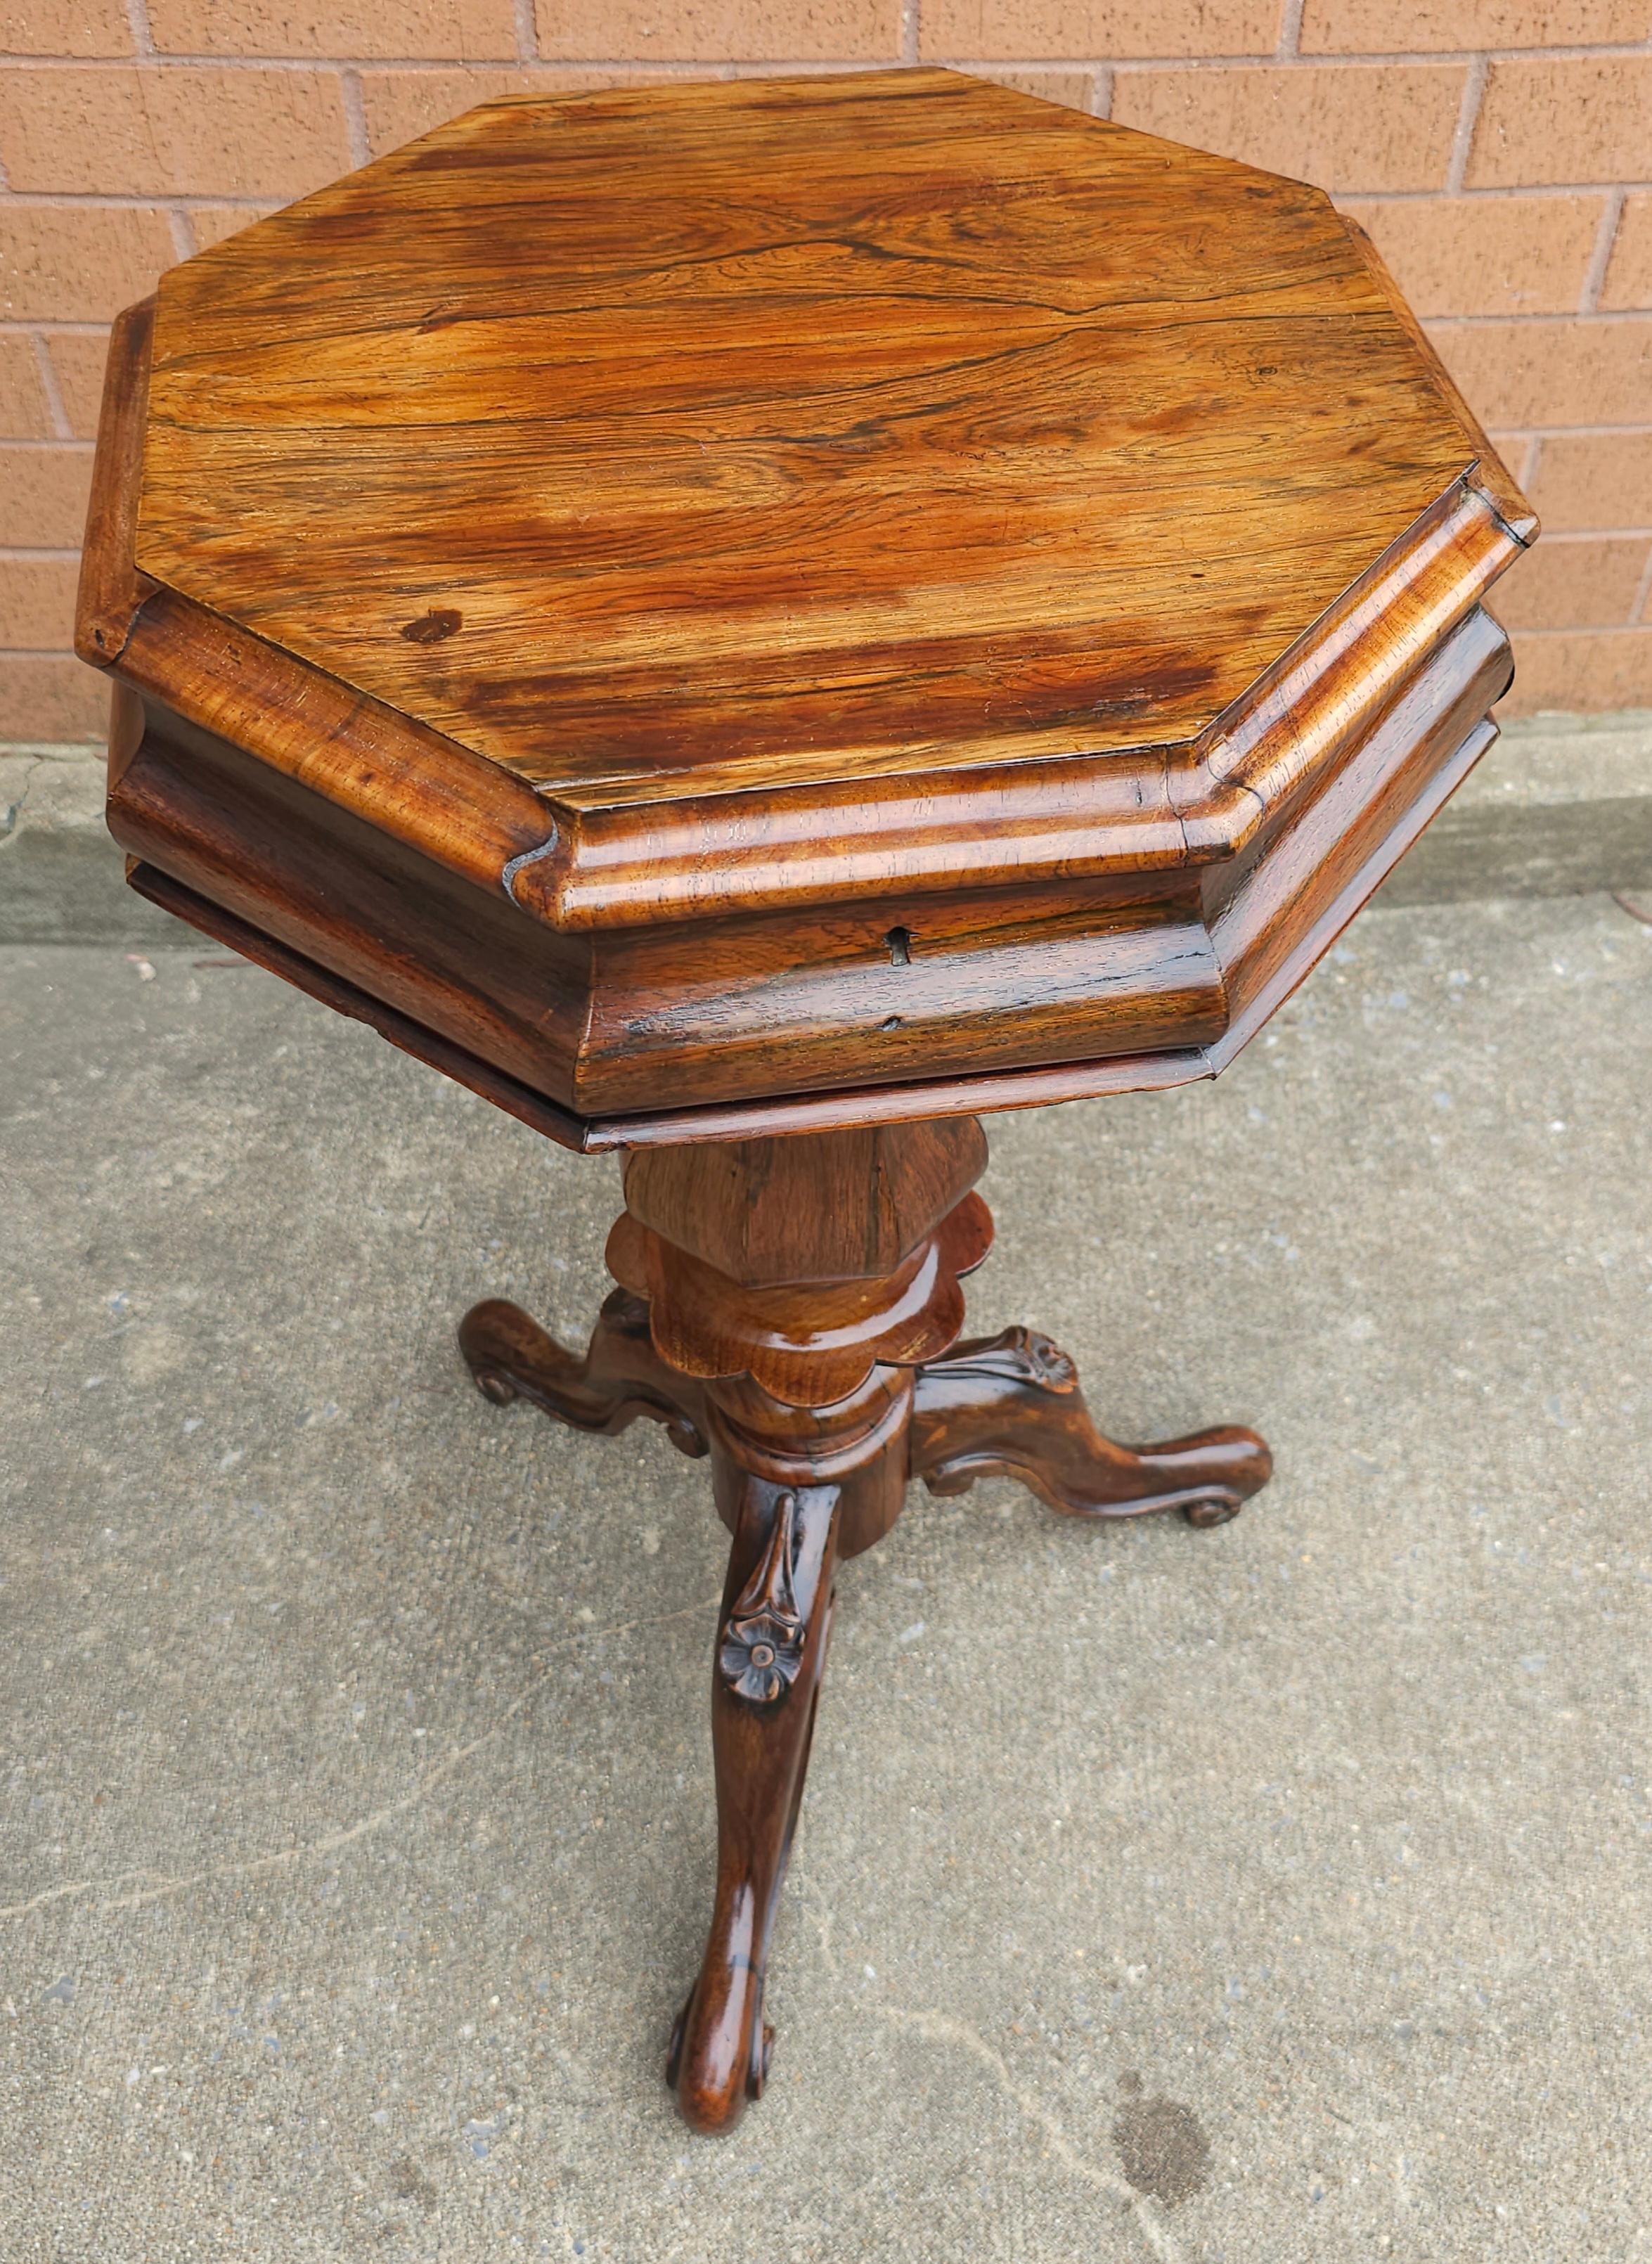 A 19th Century Victorian Rococo Revival Rosewood Tripod Sewing Stand Table. 
The sewing stand opening to view a central crimson jacquard silk pad flanked by four graduated compartments.
Measures 19